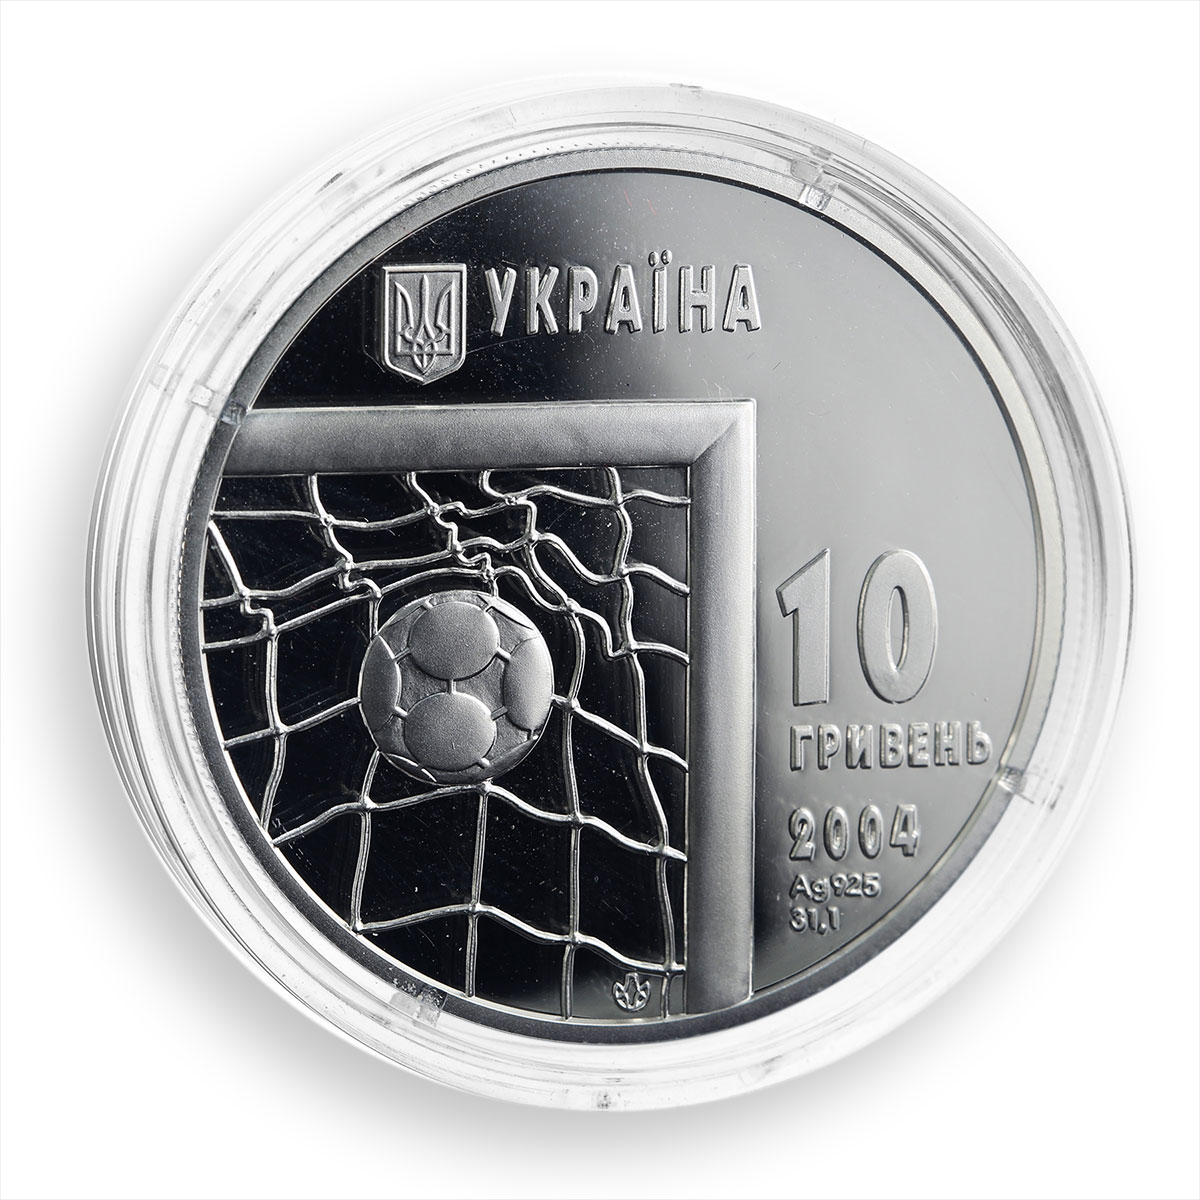 Ukraine 10 hryvnia 2006 FIFA Football World Cup Germany silver proof coin 2004